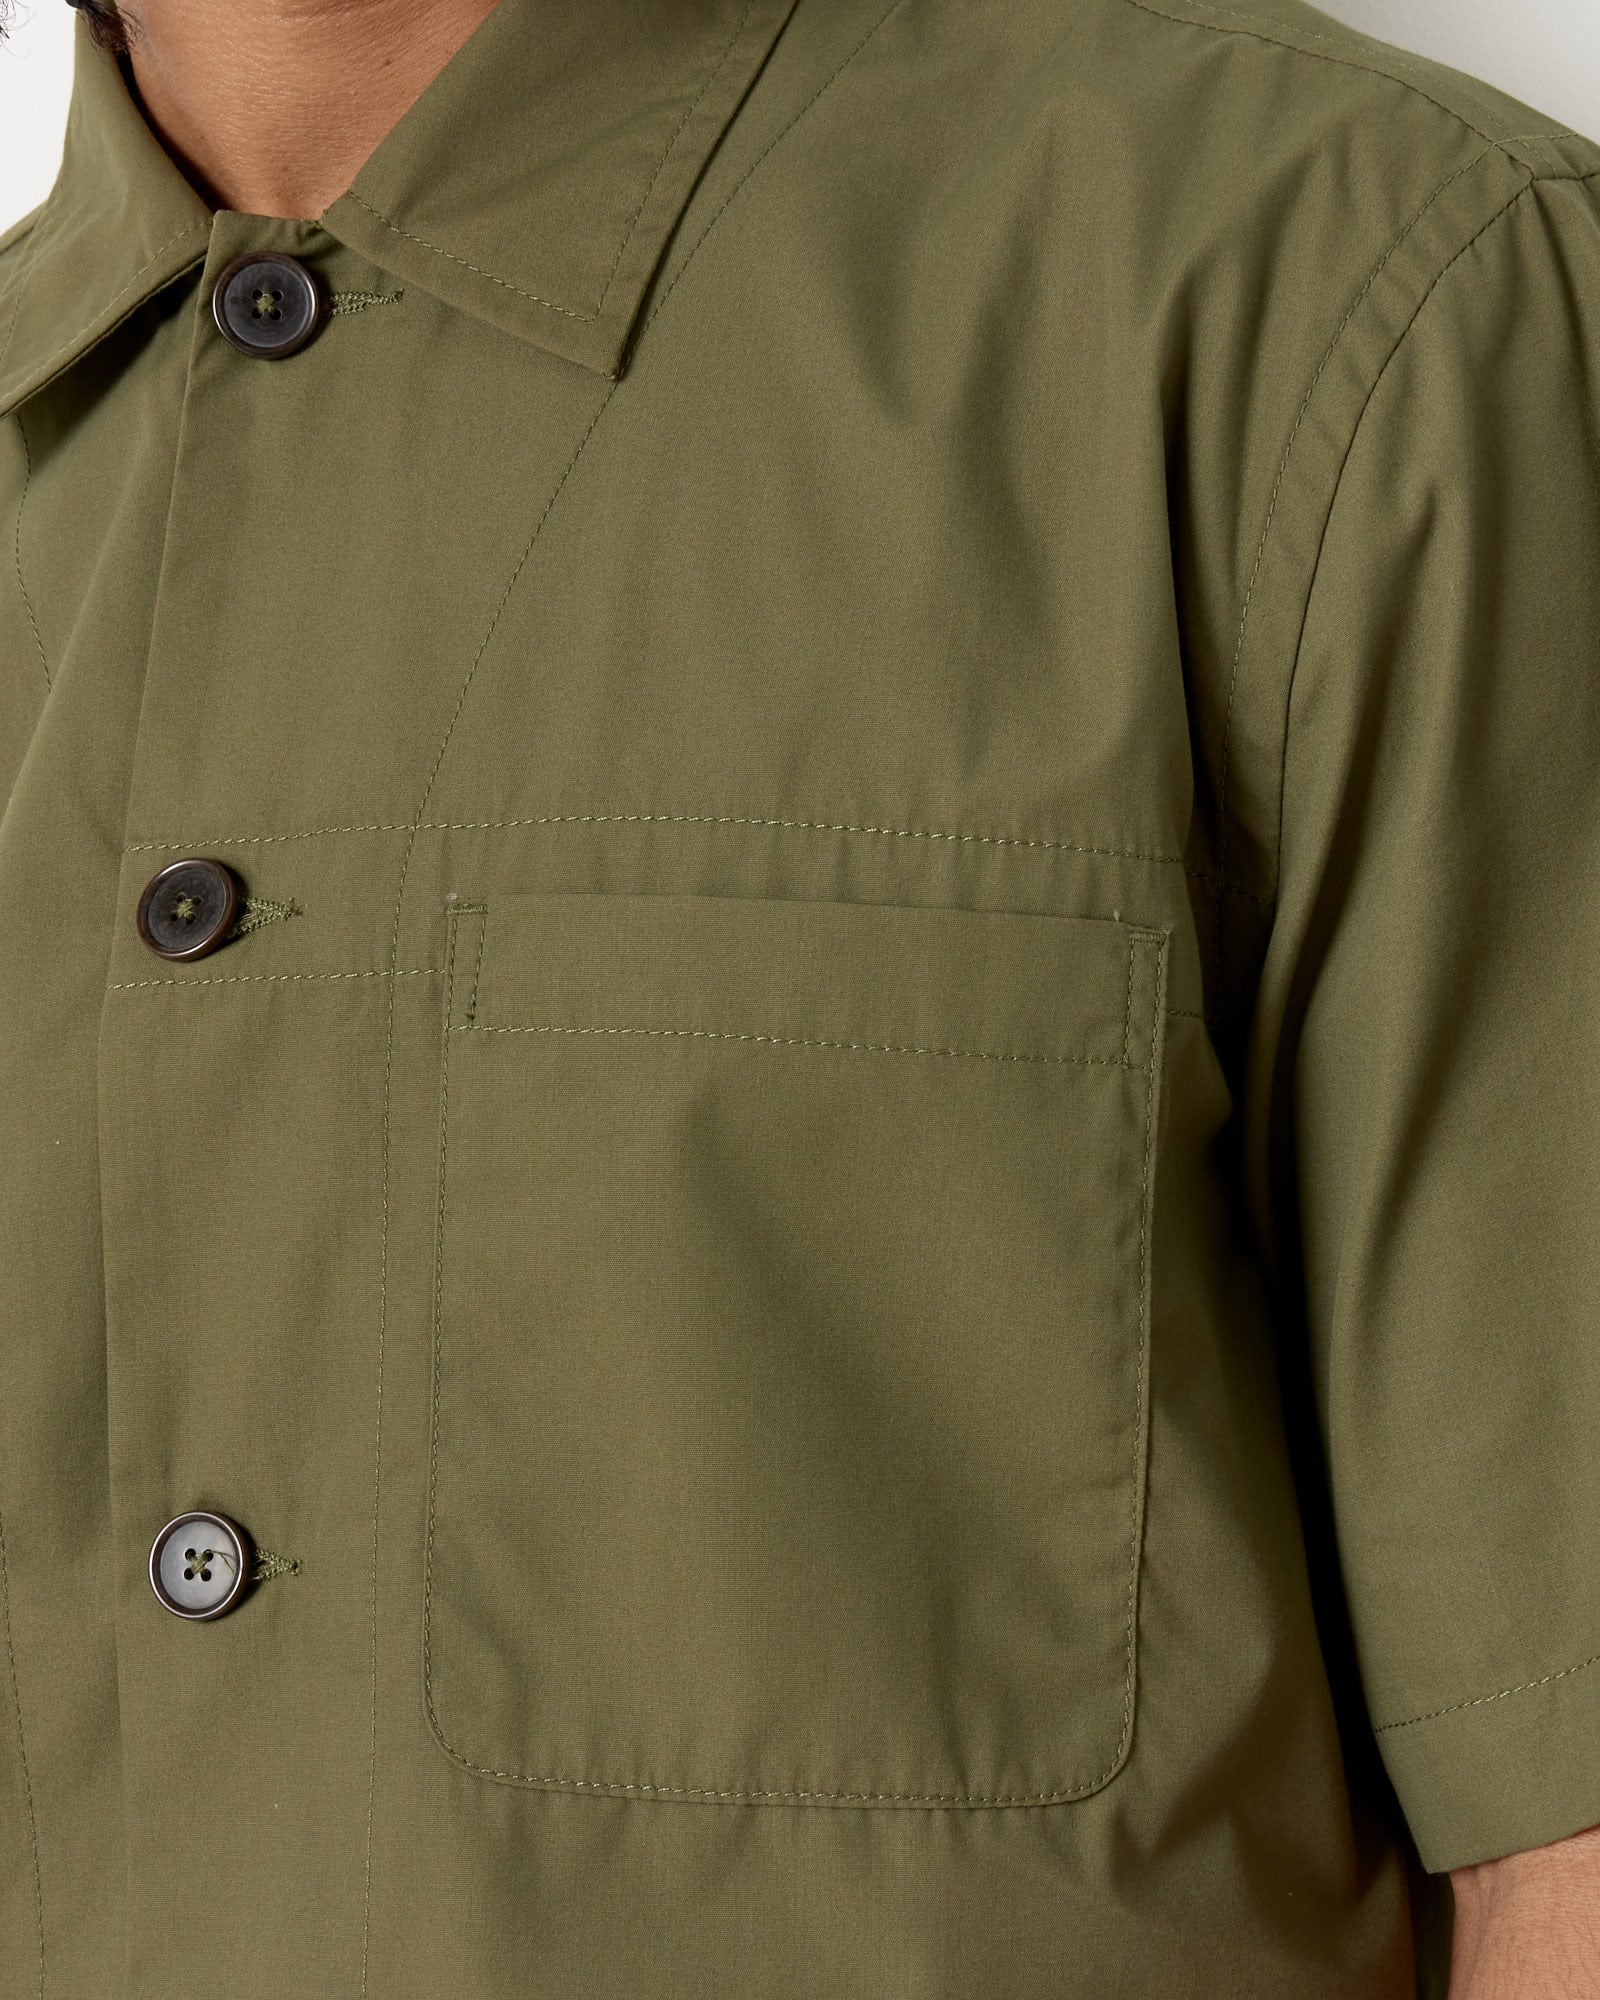 Tech Overshirt in Olive